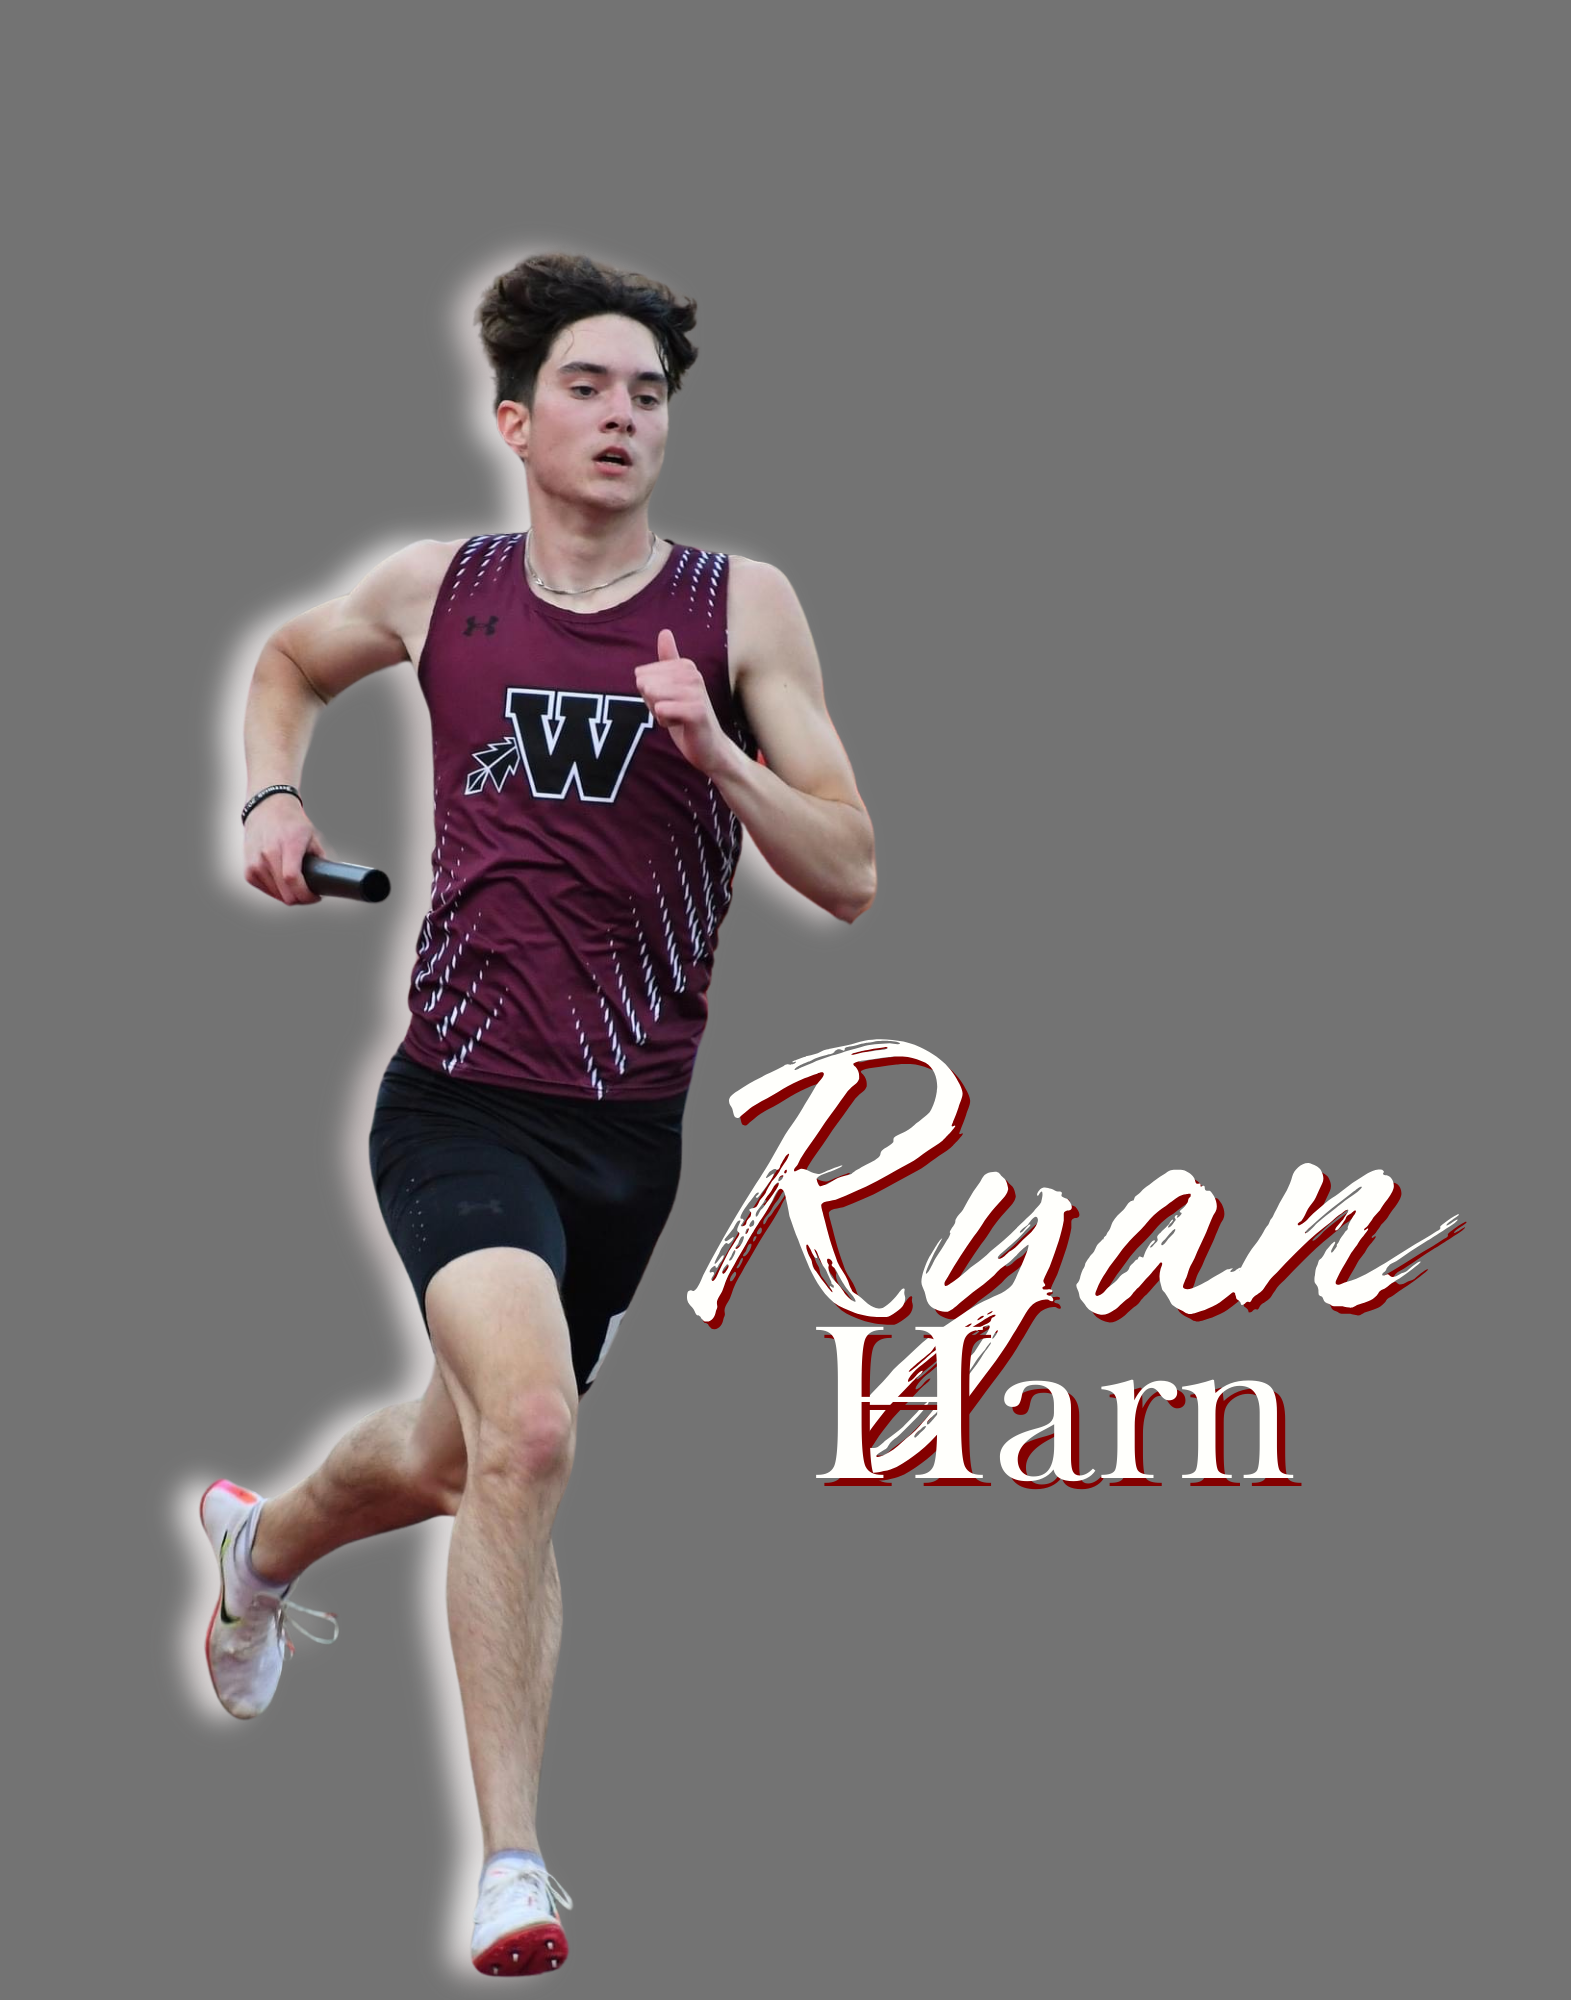 Senior Ryan Harn plans to attend Southwest Minnesota State University to participate in their Track and Field program